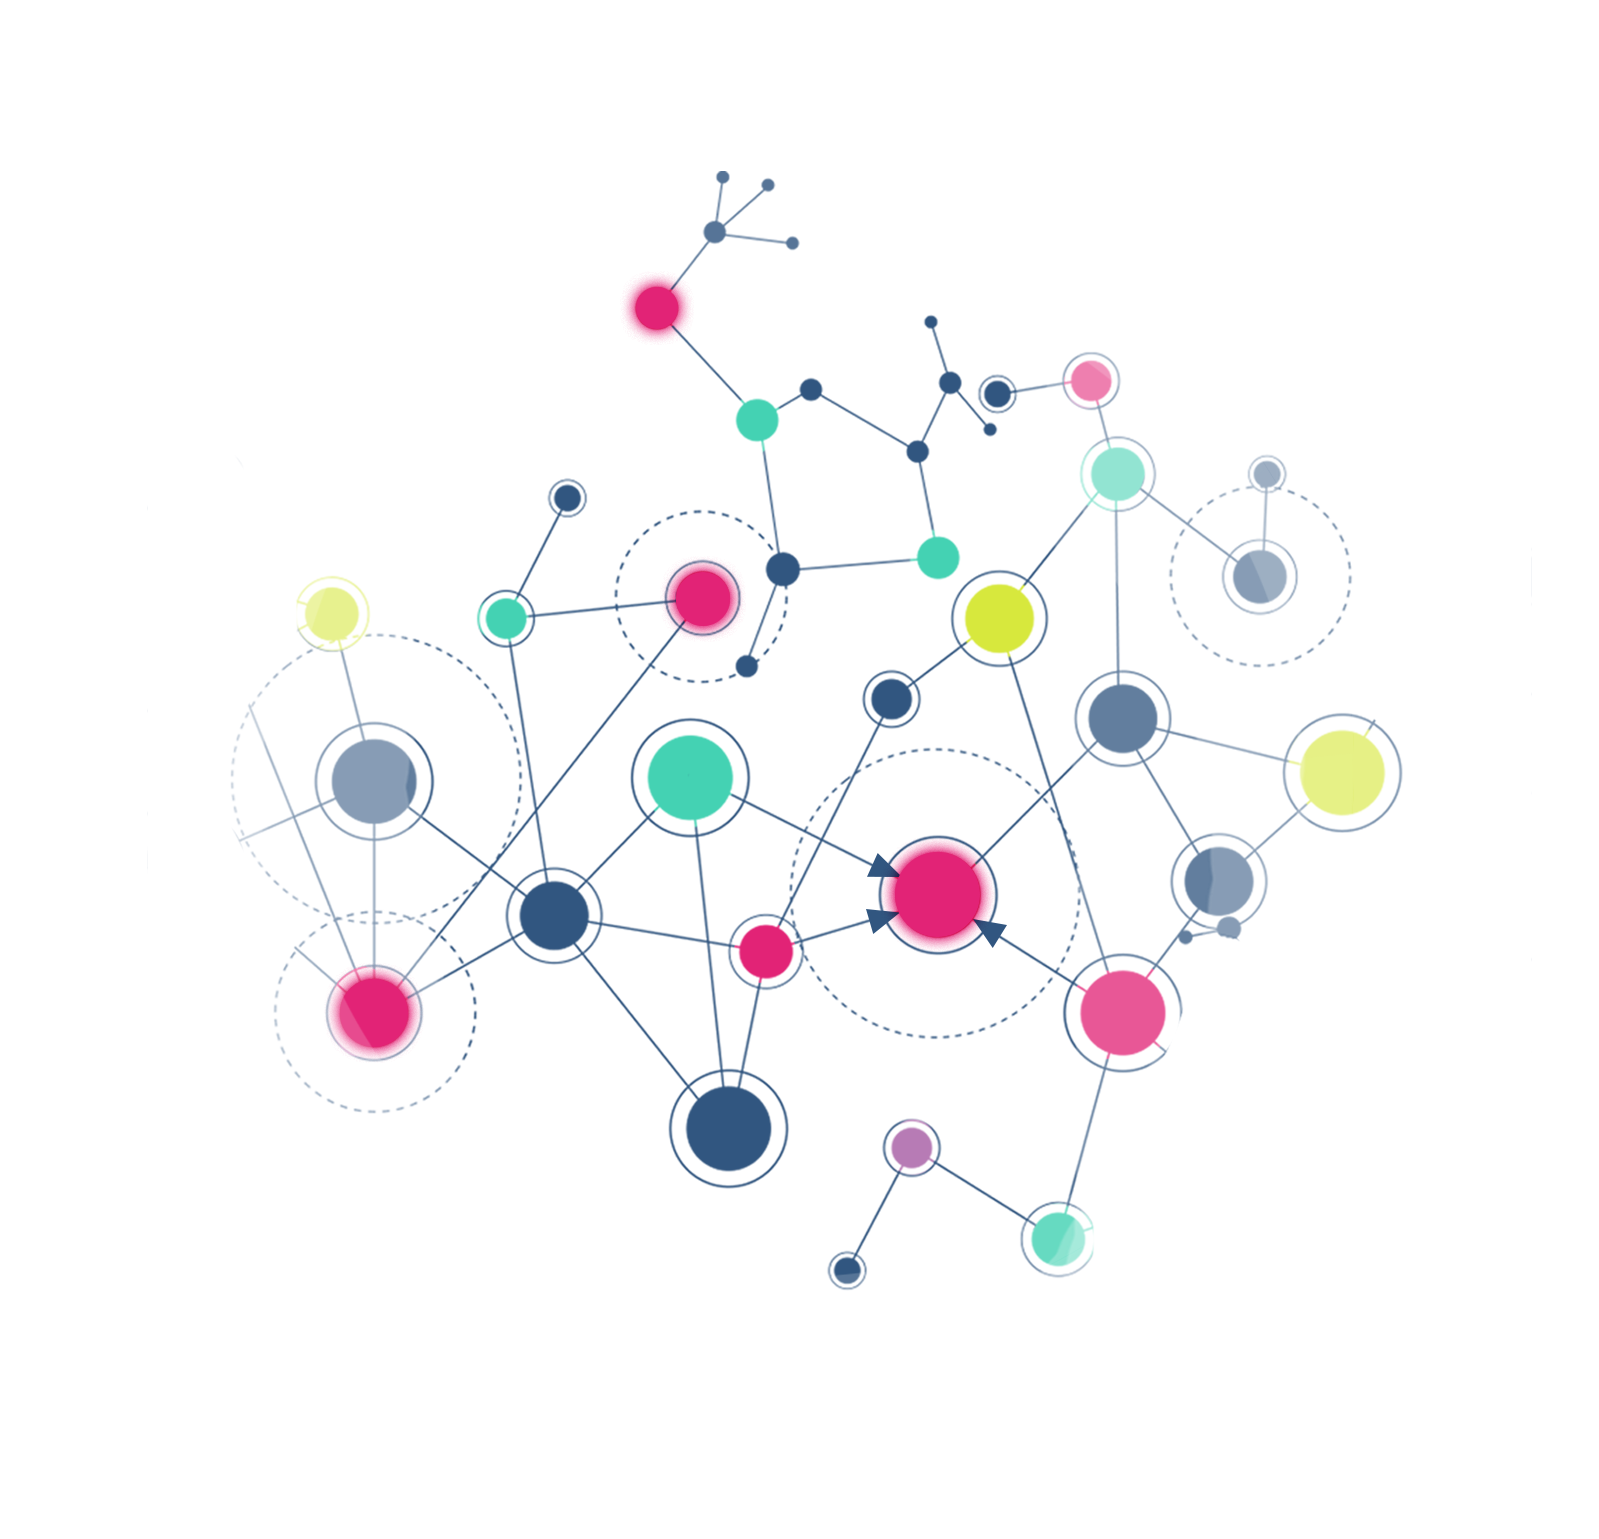 An intelligent network depicted by various colored dots and connected lines